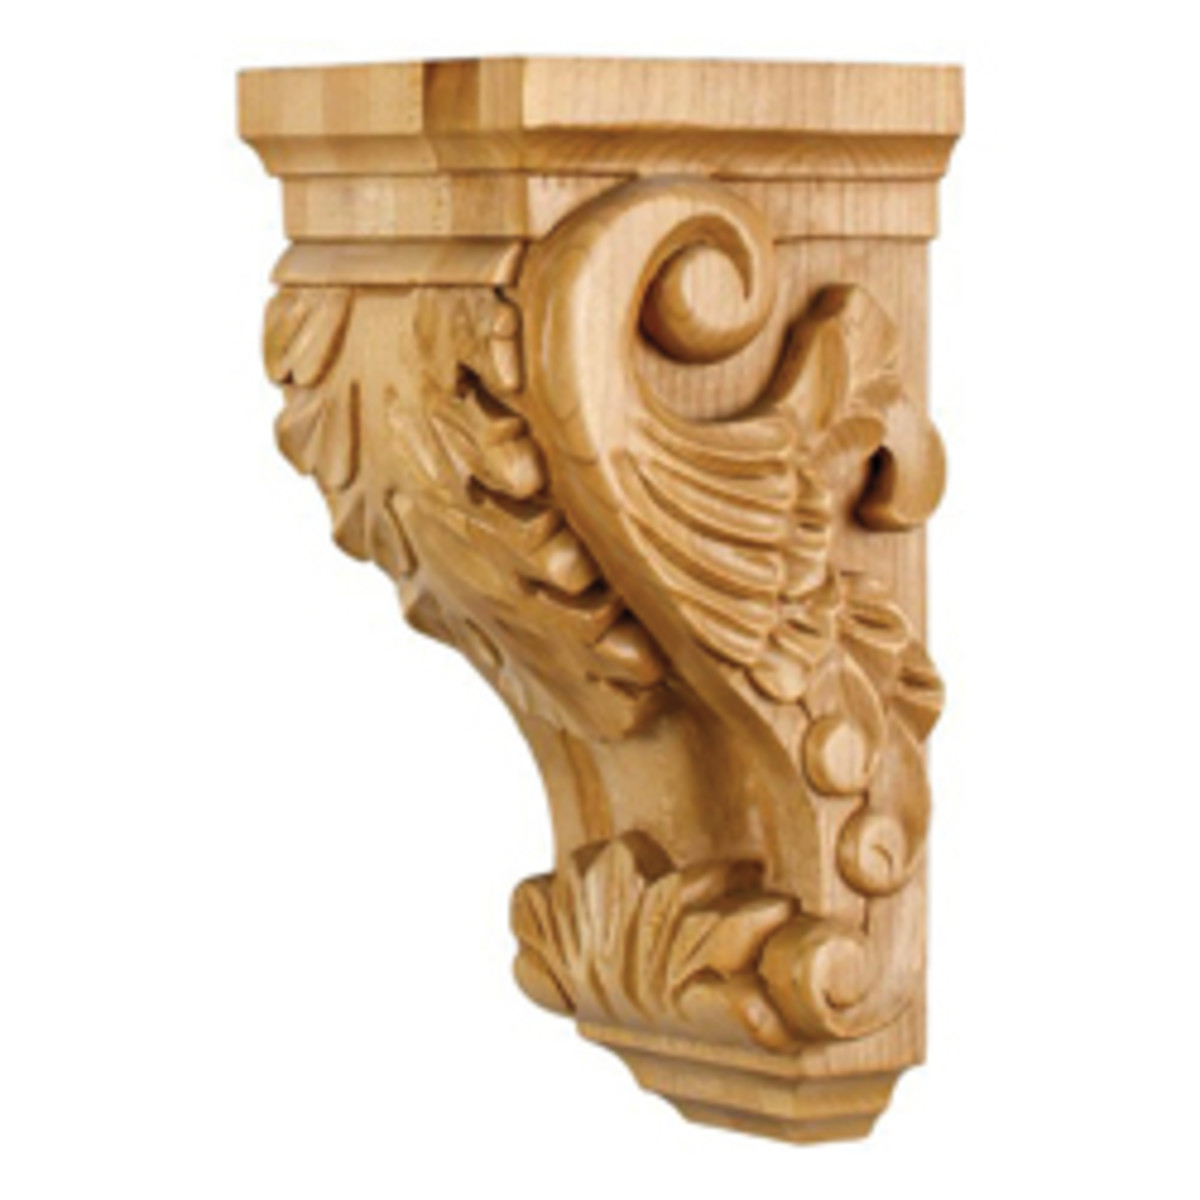 Hardware Resources has nine new wooden corbels to choose from.